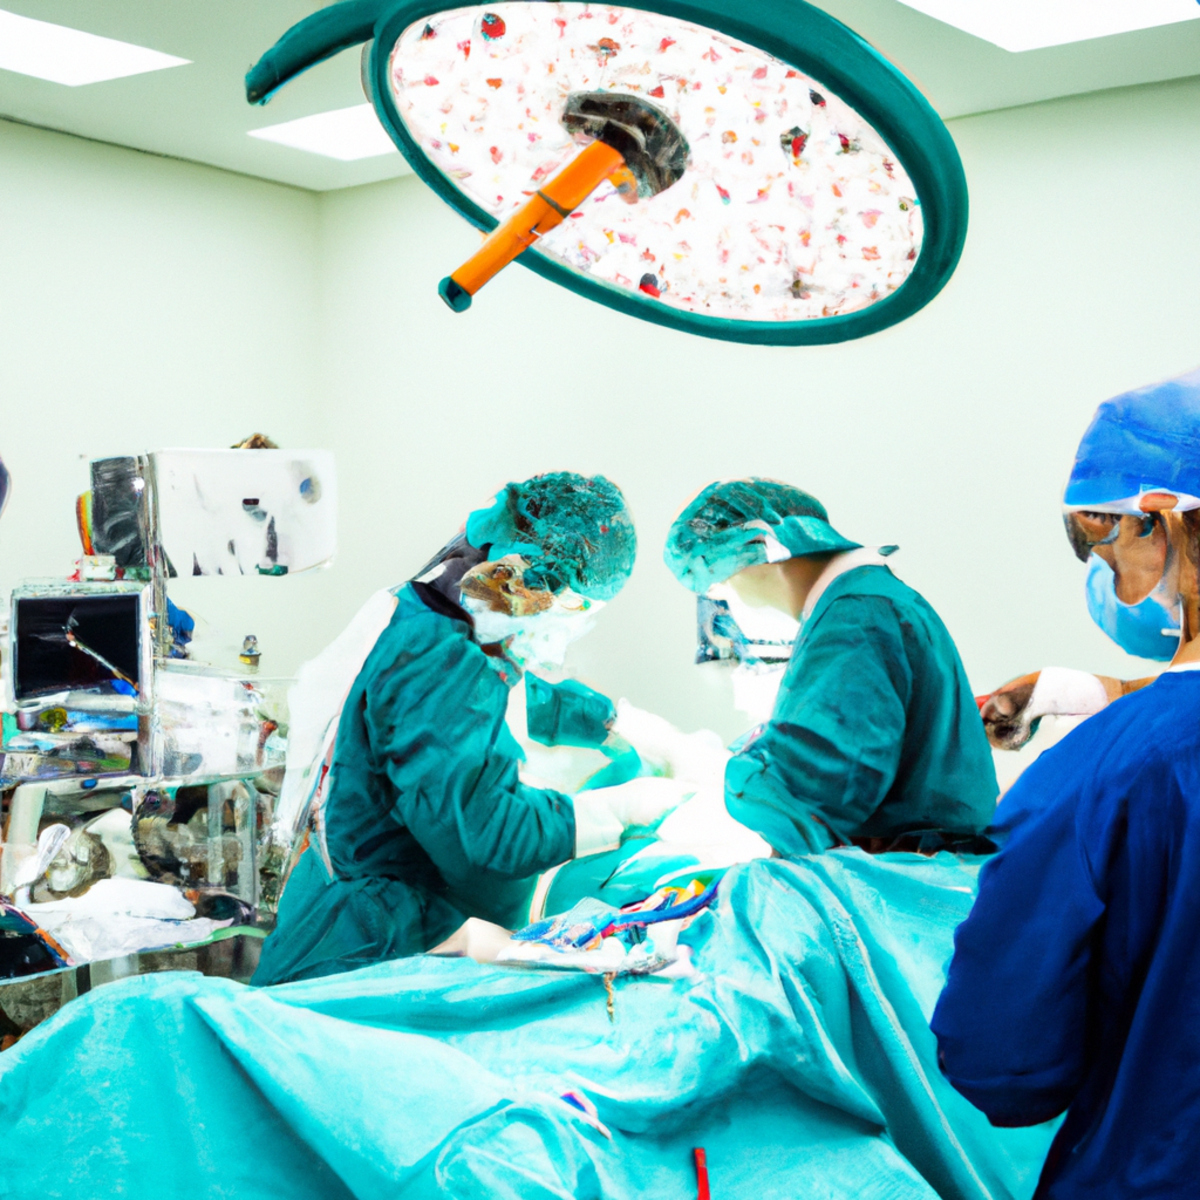 Skilled surgeons perform life-saving gallbladder surgery in a sterile operating room, highlighting urgency and precision - Gallbladder Volvulus